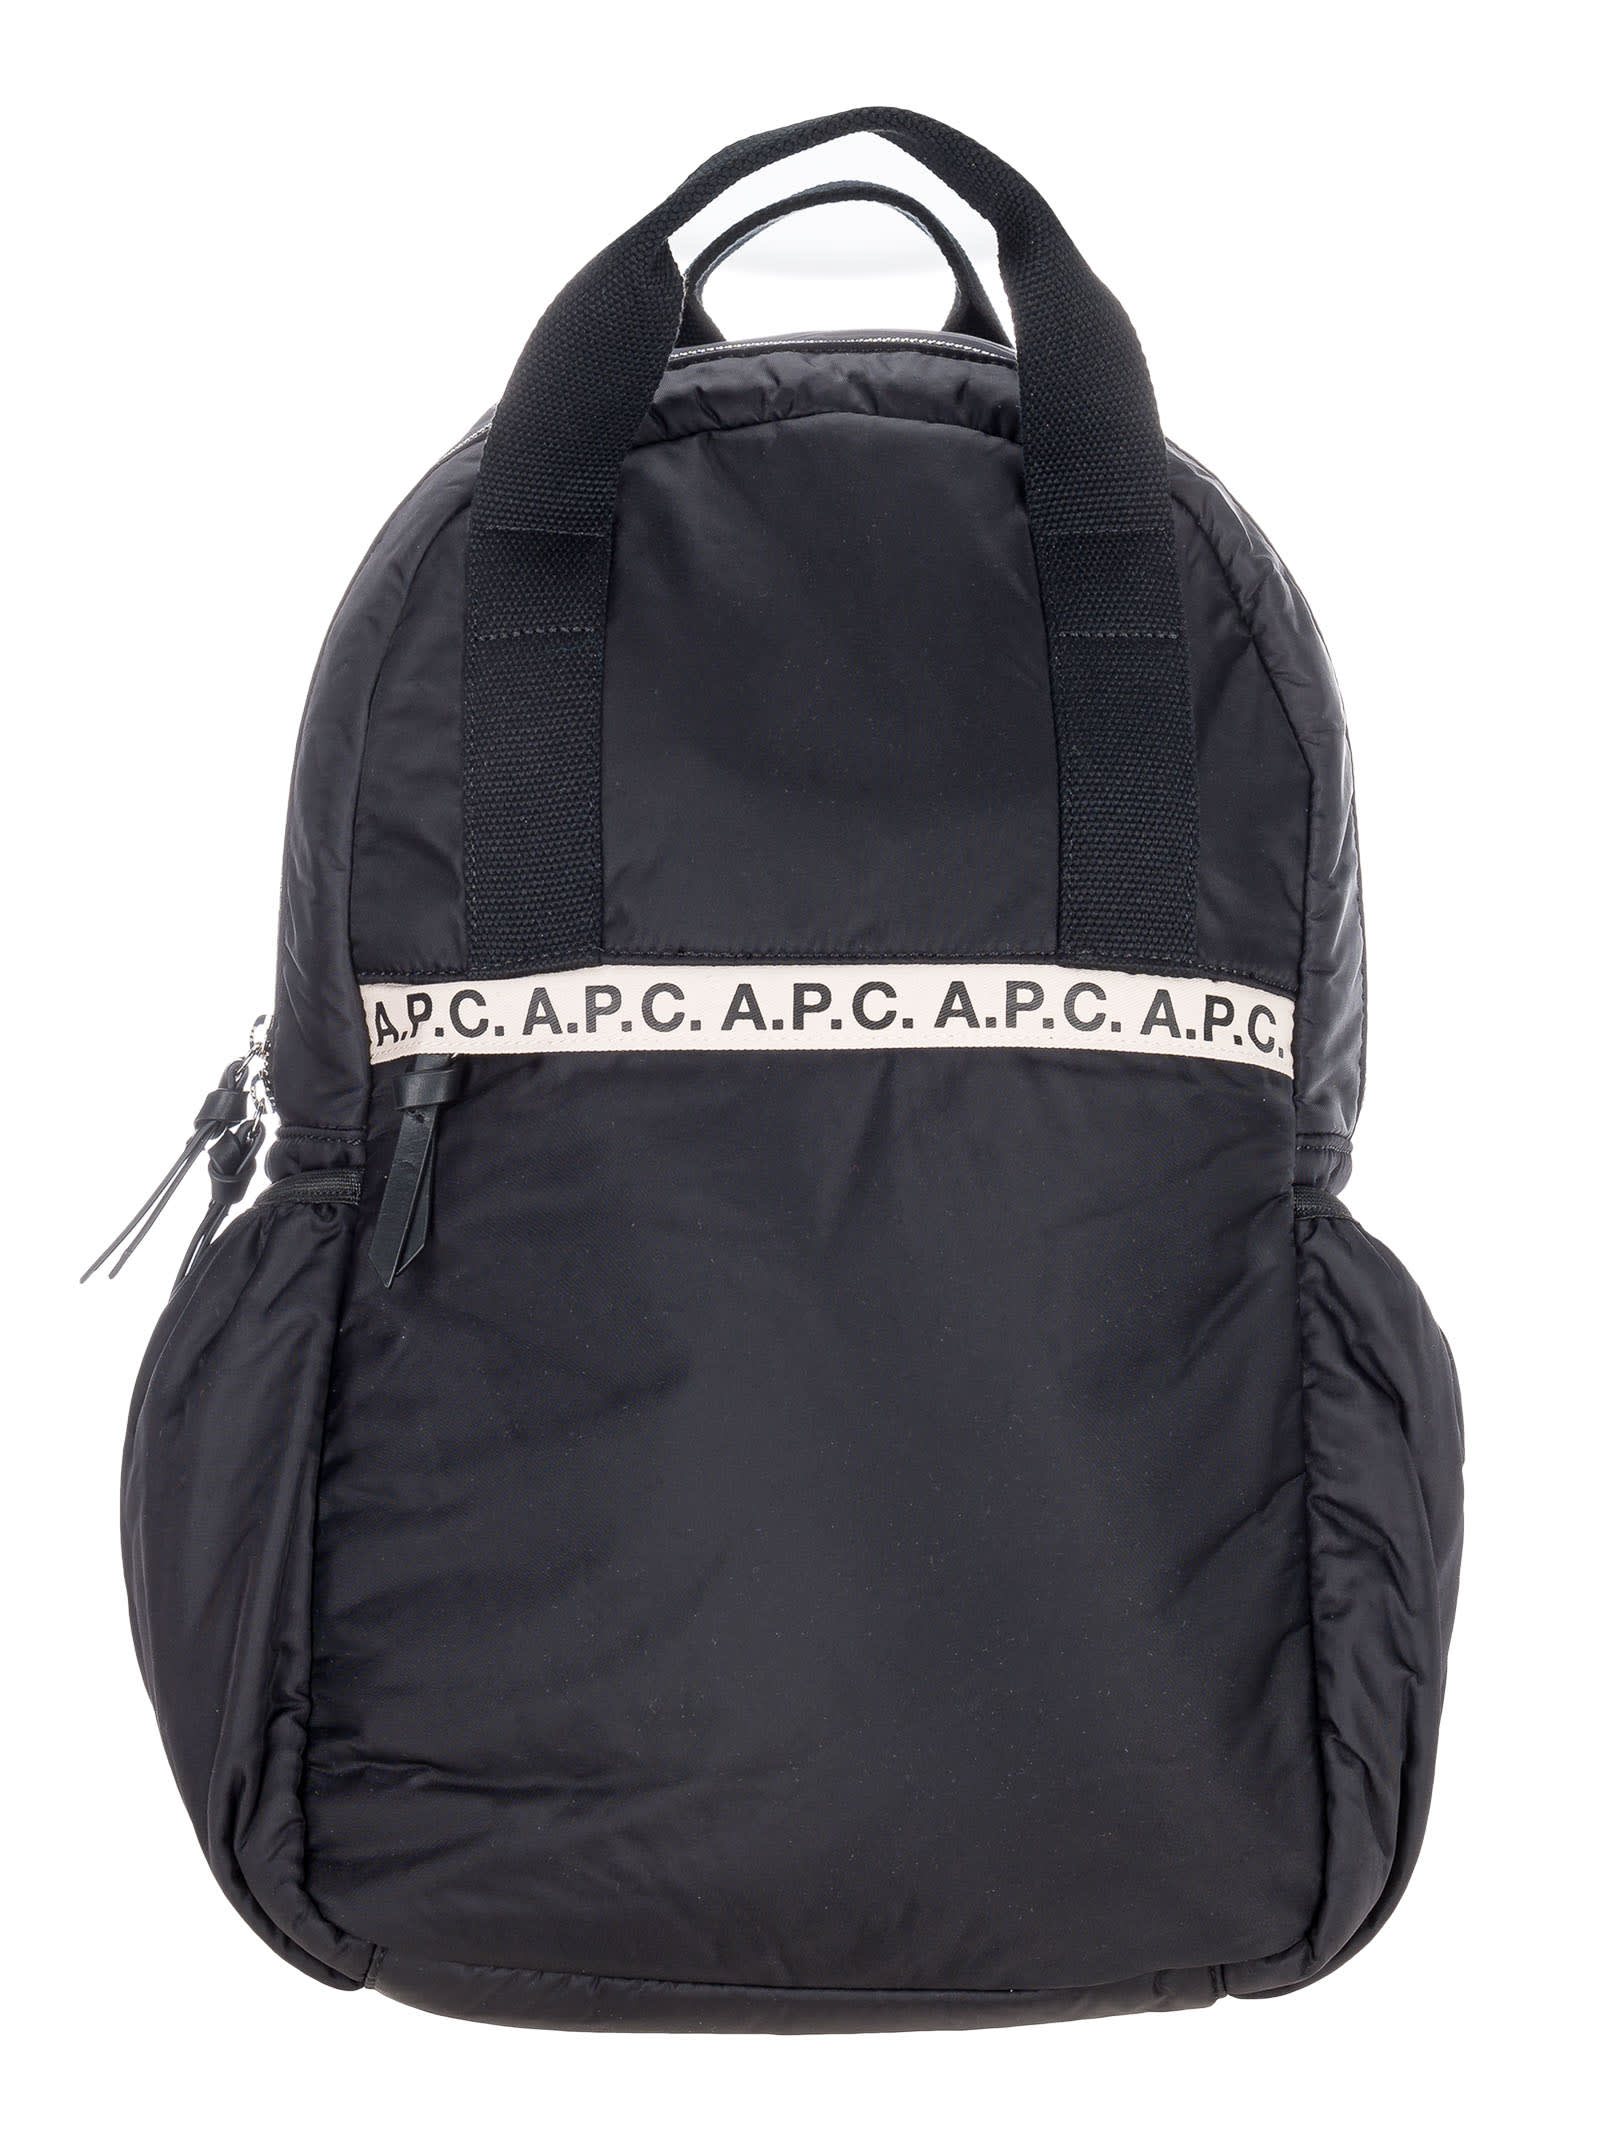 A.p.c. Nylon Repeat Backpack By A.p.c.